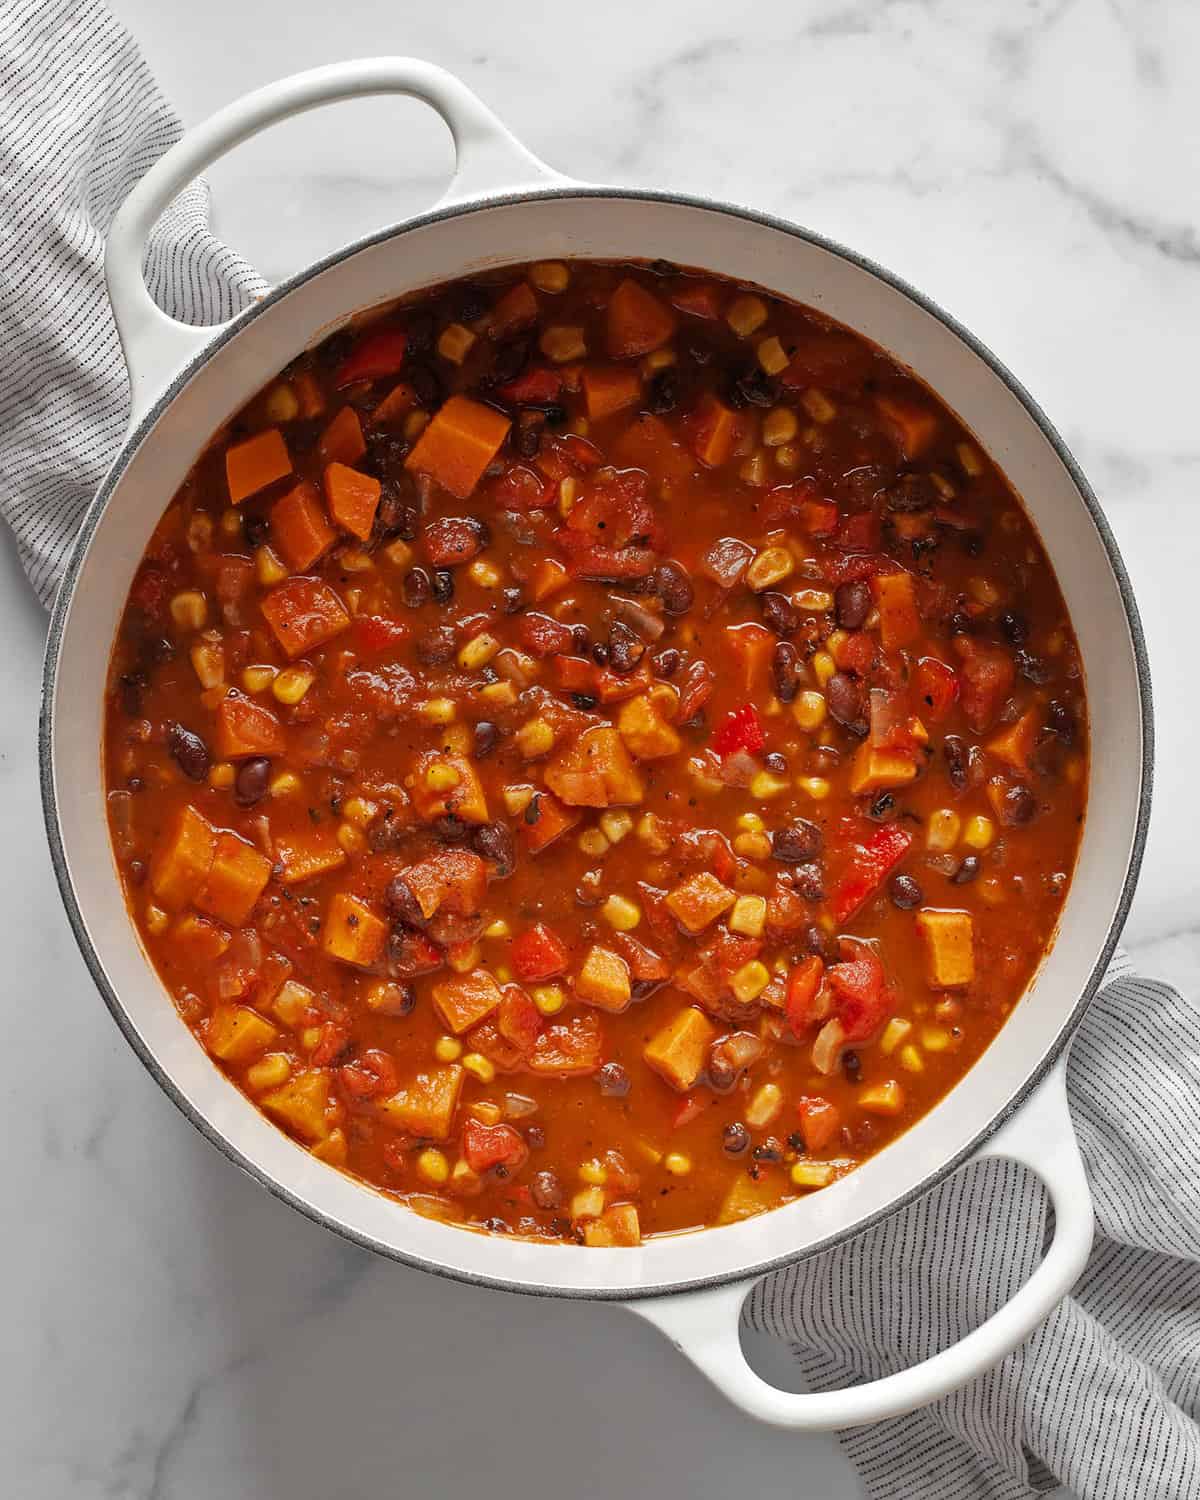 Large pot of vegetarian chili with sweet potatoes and black beans.